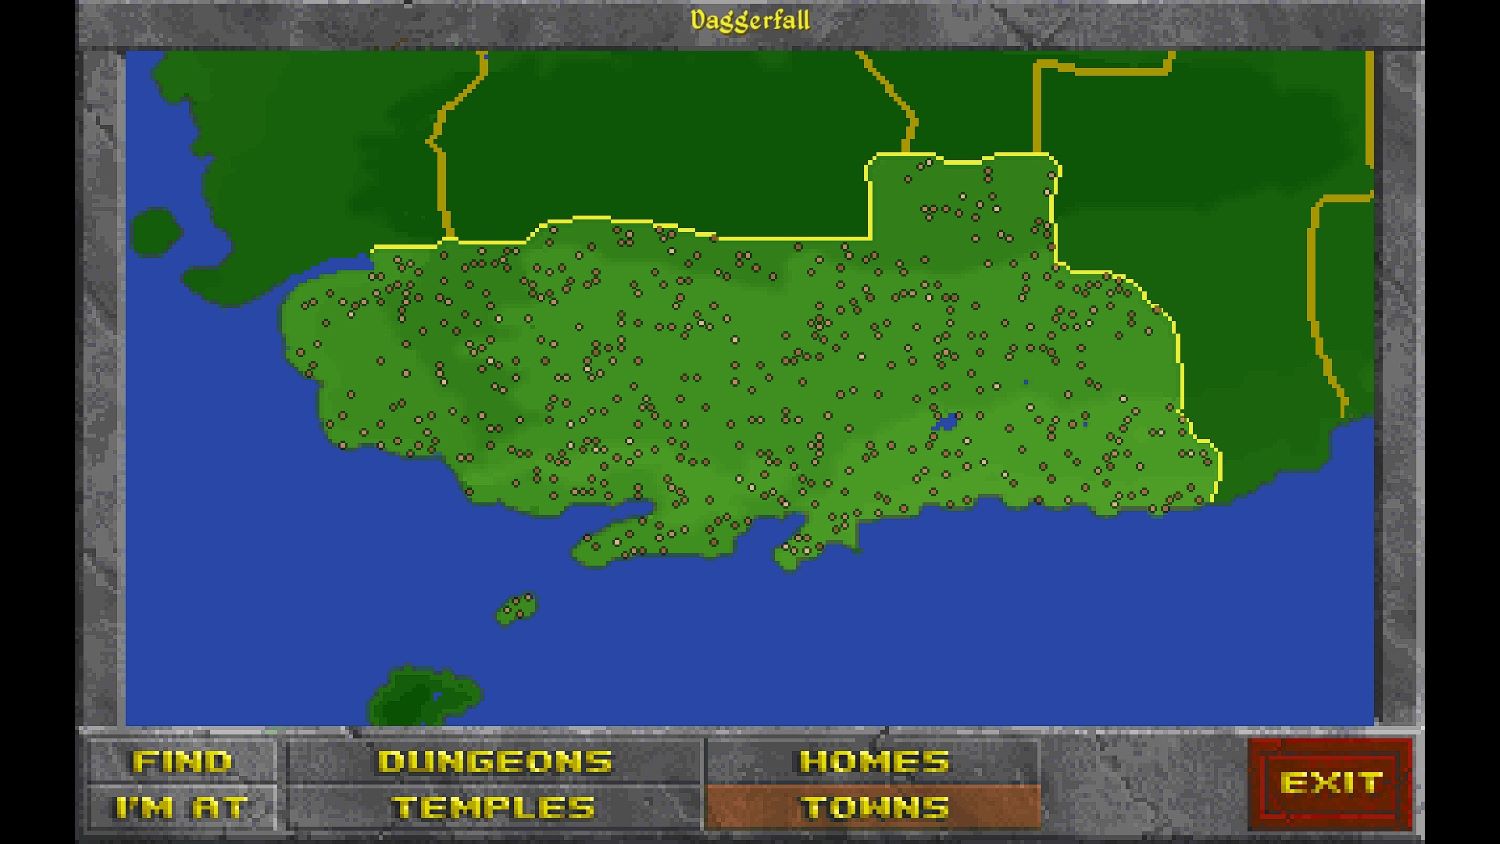 Daggerfall's map showing towns